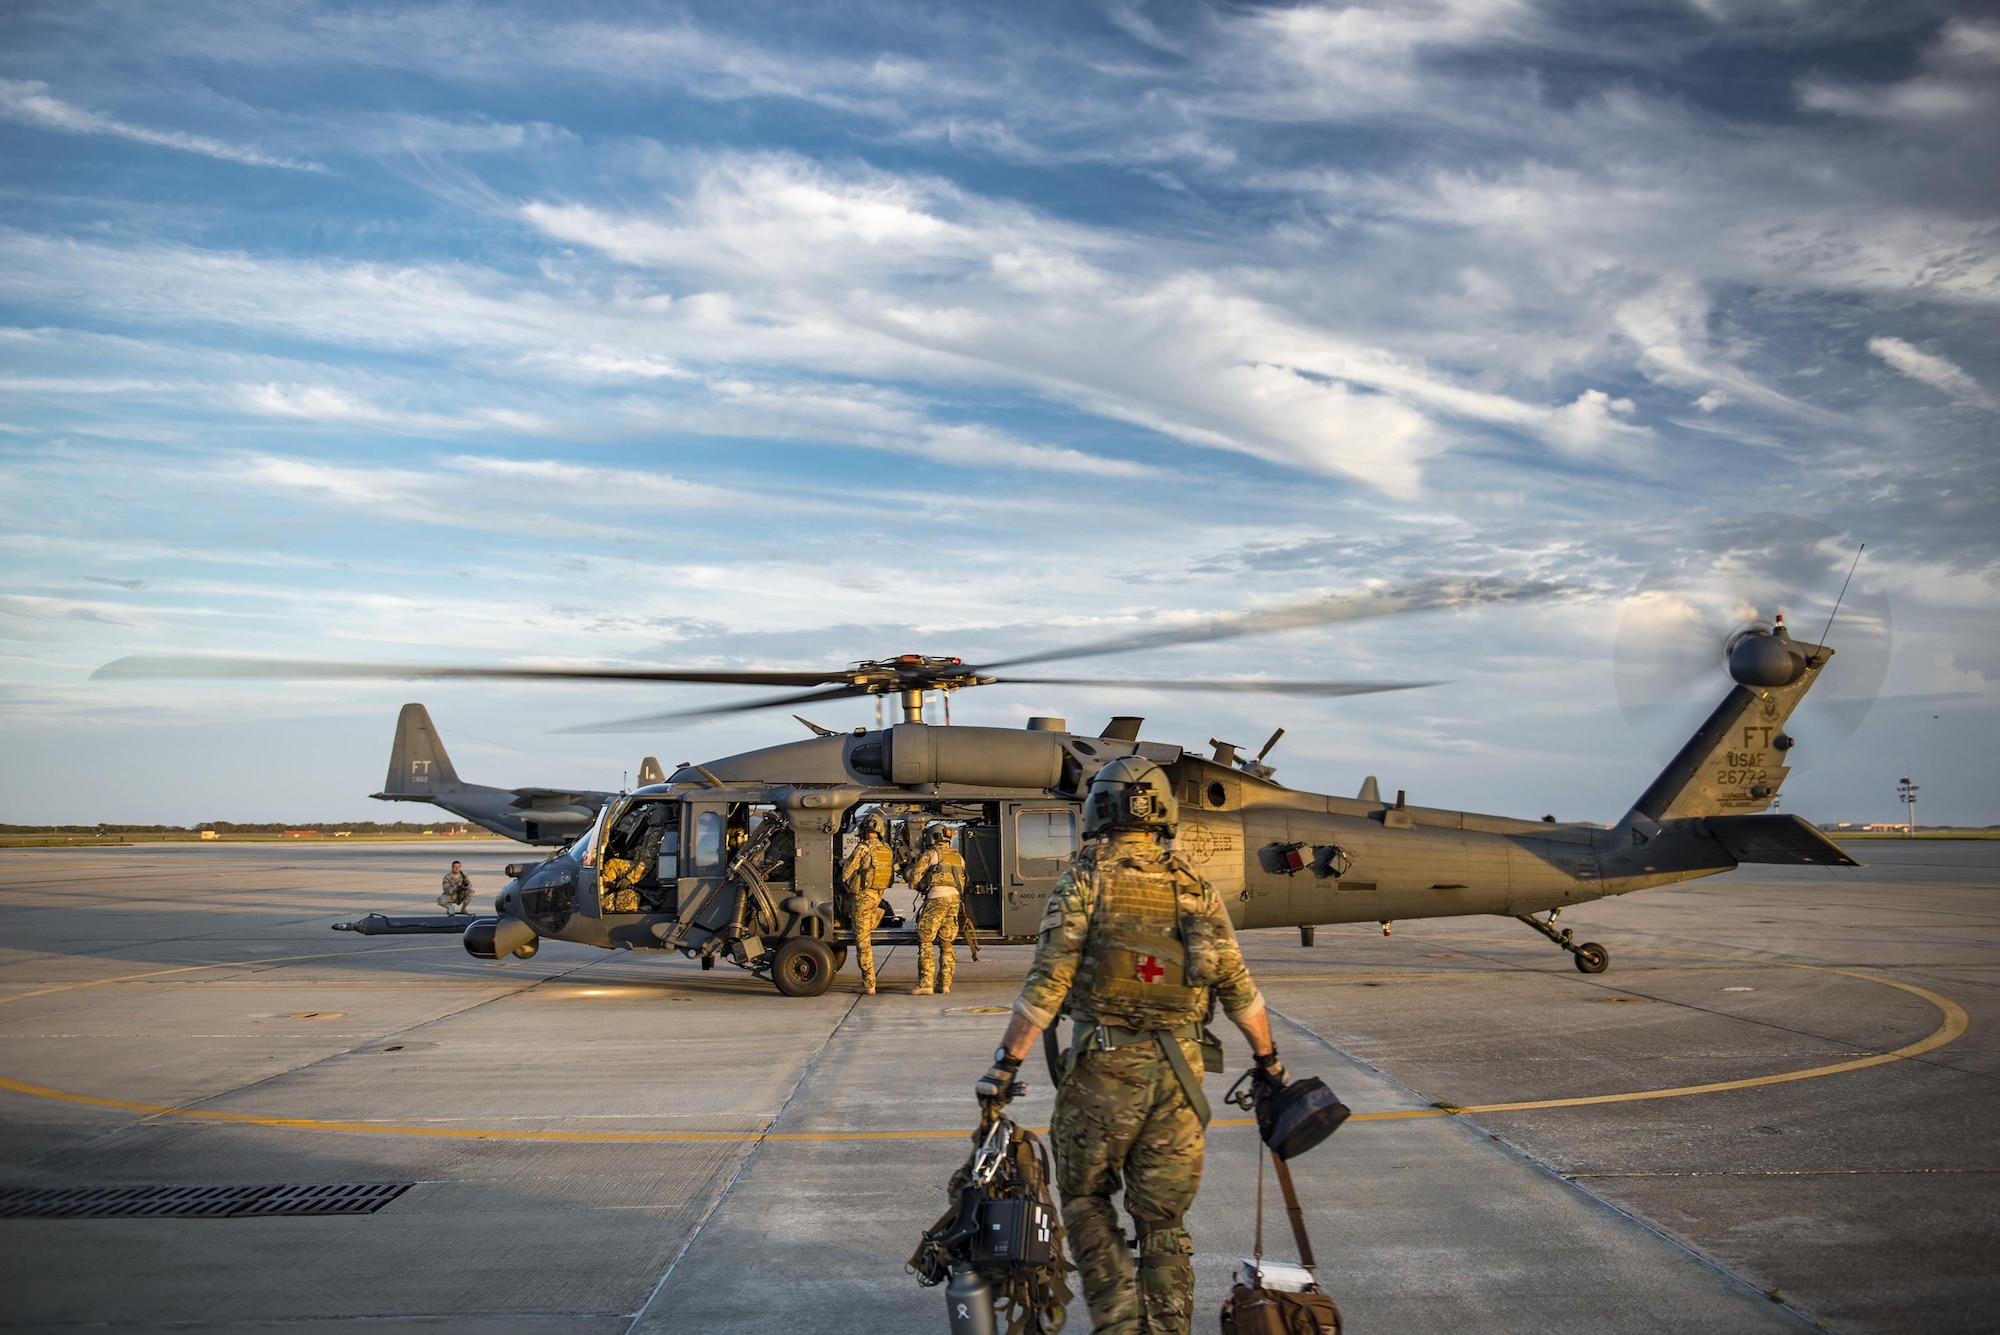 A special missions aviator from the 41st Rescue Squadron walks towards an HH-60G Pave Hawk for an engine-running crew swap during a pre-deployment ‘spin-up’ exercise, Dec. 12, 2016, at Patrick Air Force Base, Fla. During the spin-up, the 41st RQS, alongside mission partners from the 38th and 71st Rescue Squadrons, conducted high-tempo rescue operations designed to mimic the missions they will fly downrange. They based their operations out of Patrick AFB and flew missions to Avon Park Air Force Range, Fla. (U.S. Air Force photo by Staff Sgt. Ryan Callaghan)